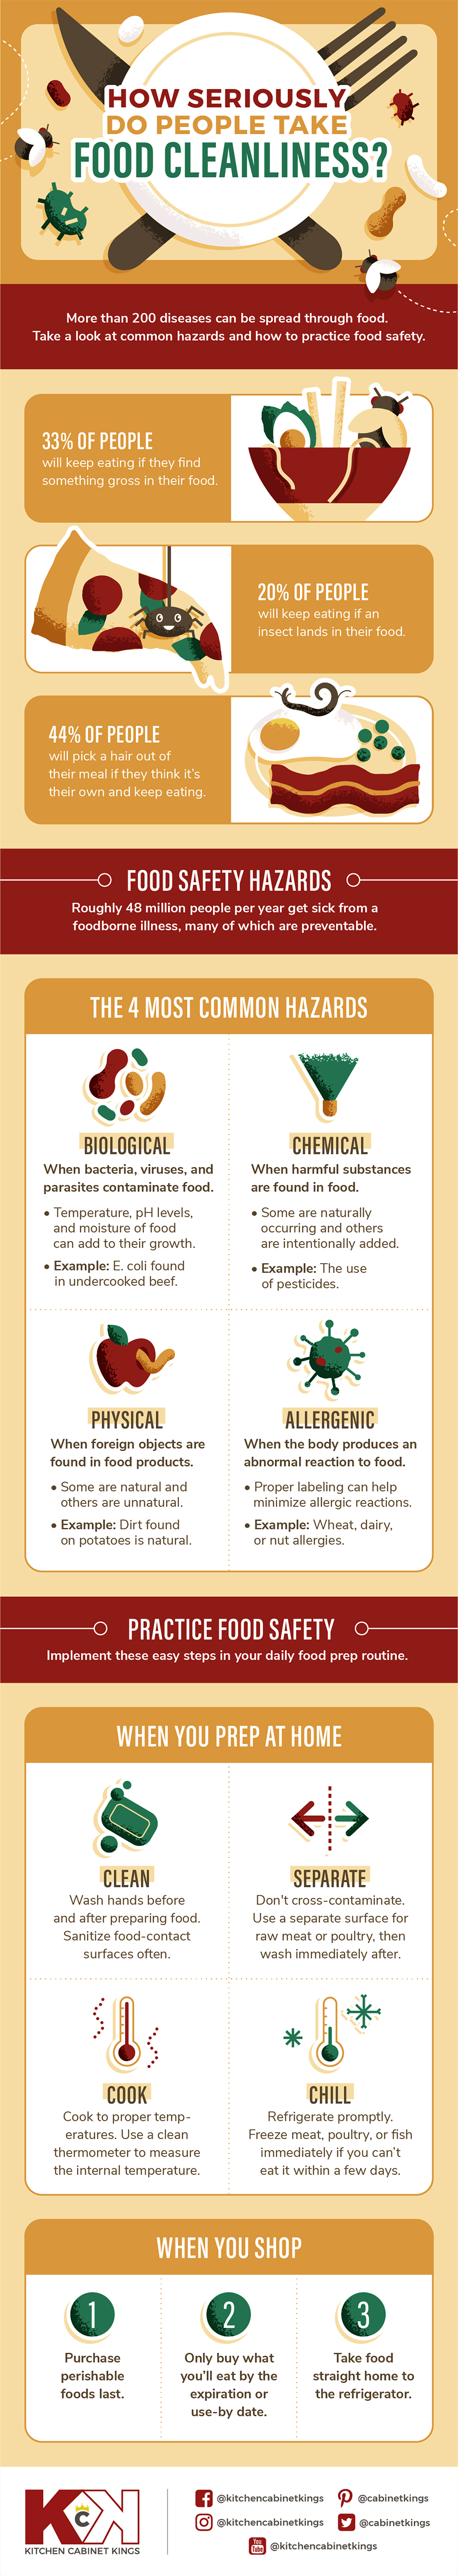 food-cleanliness-infographic